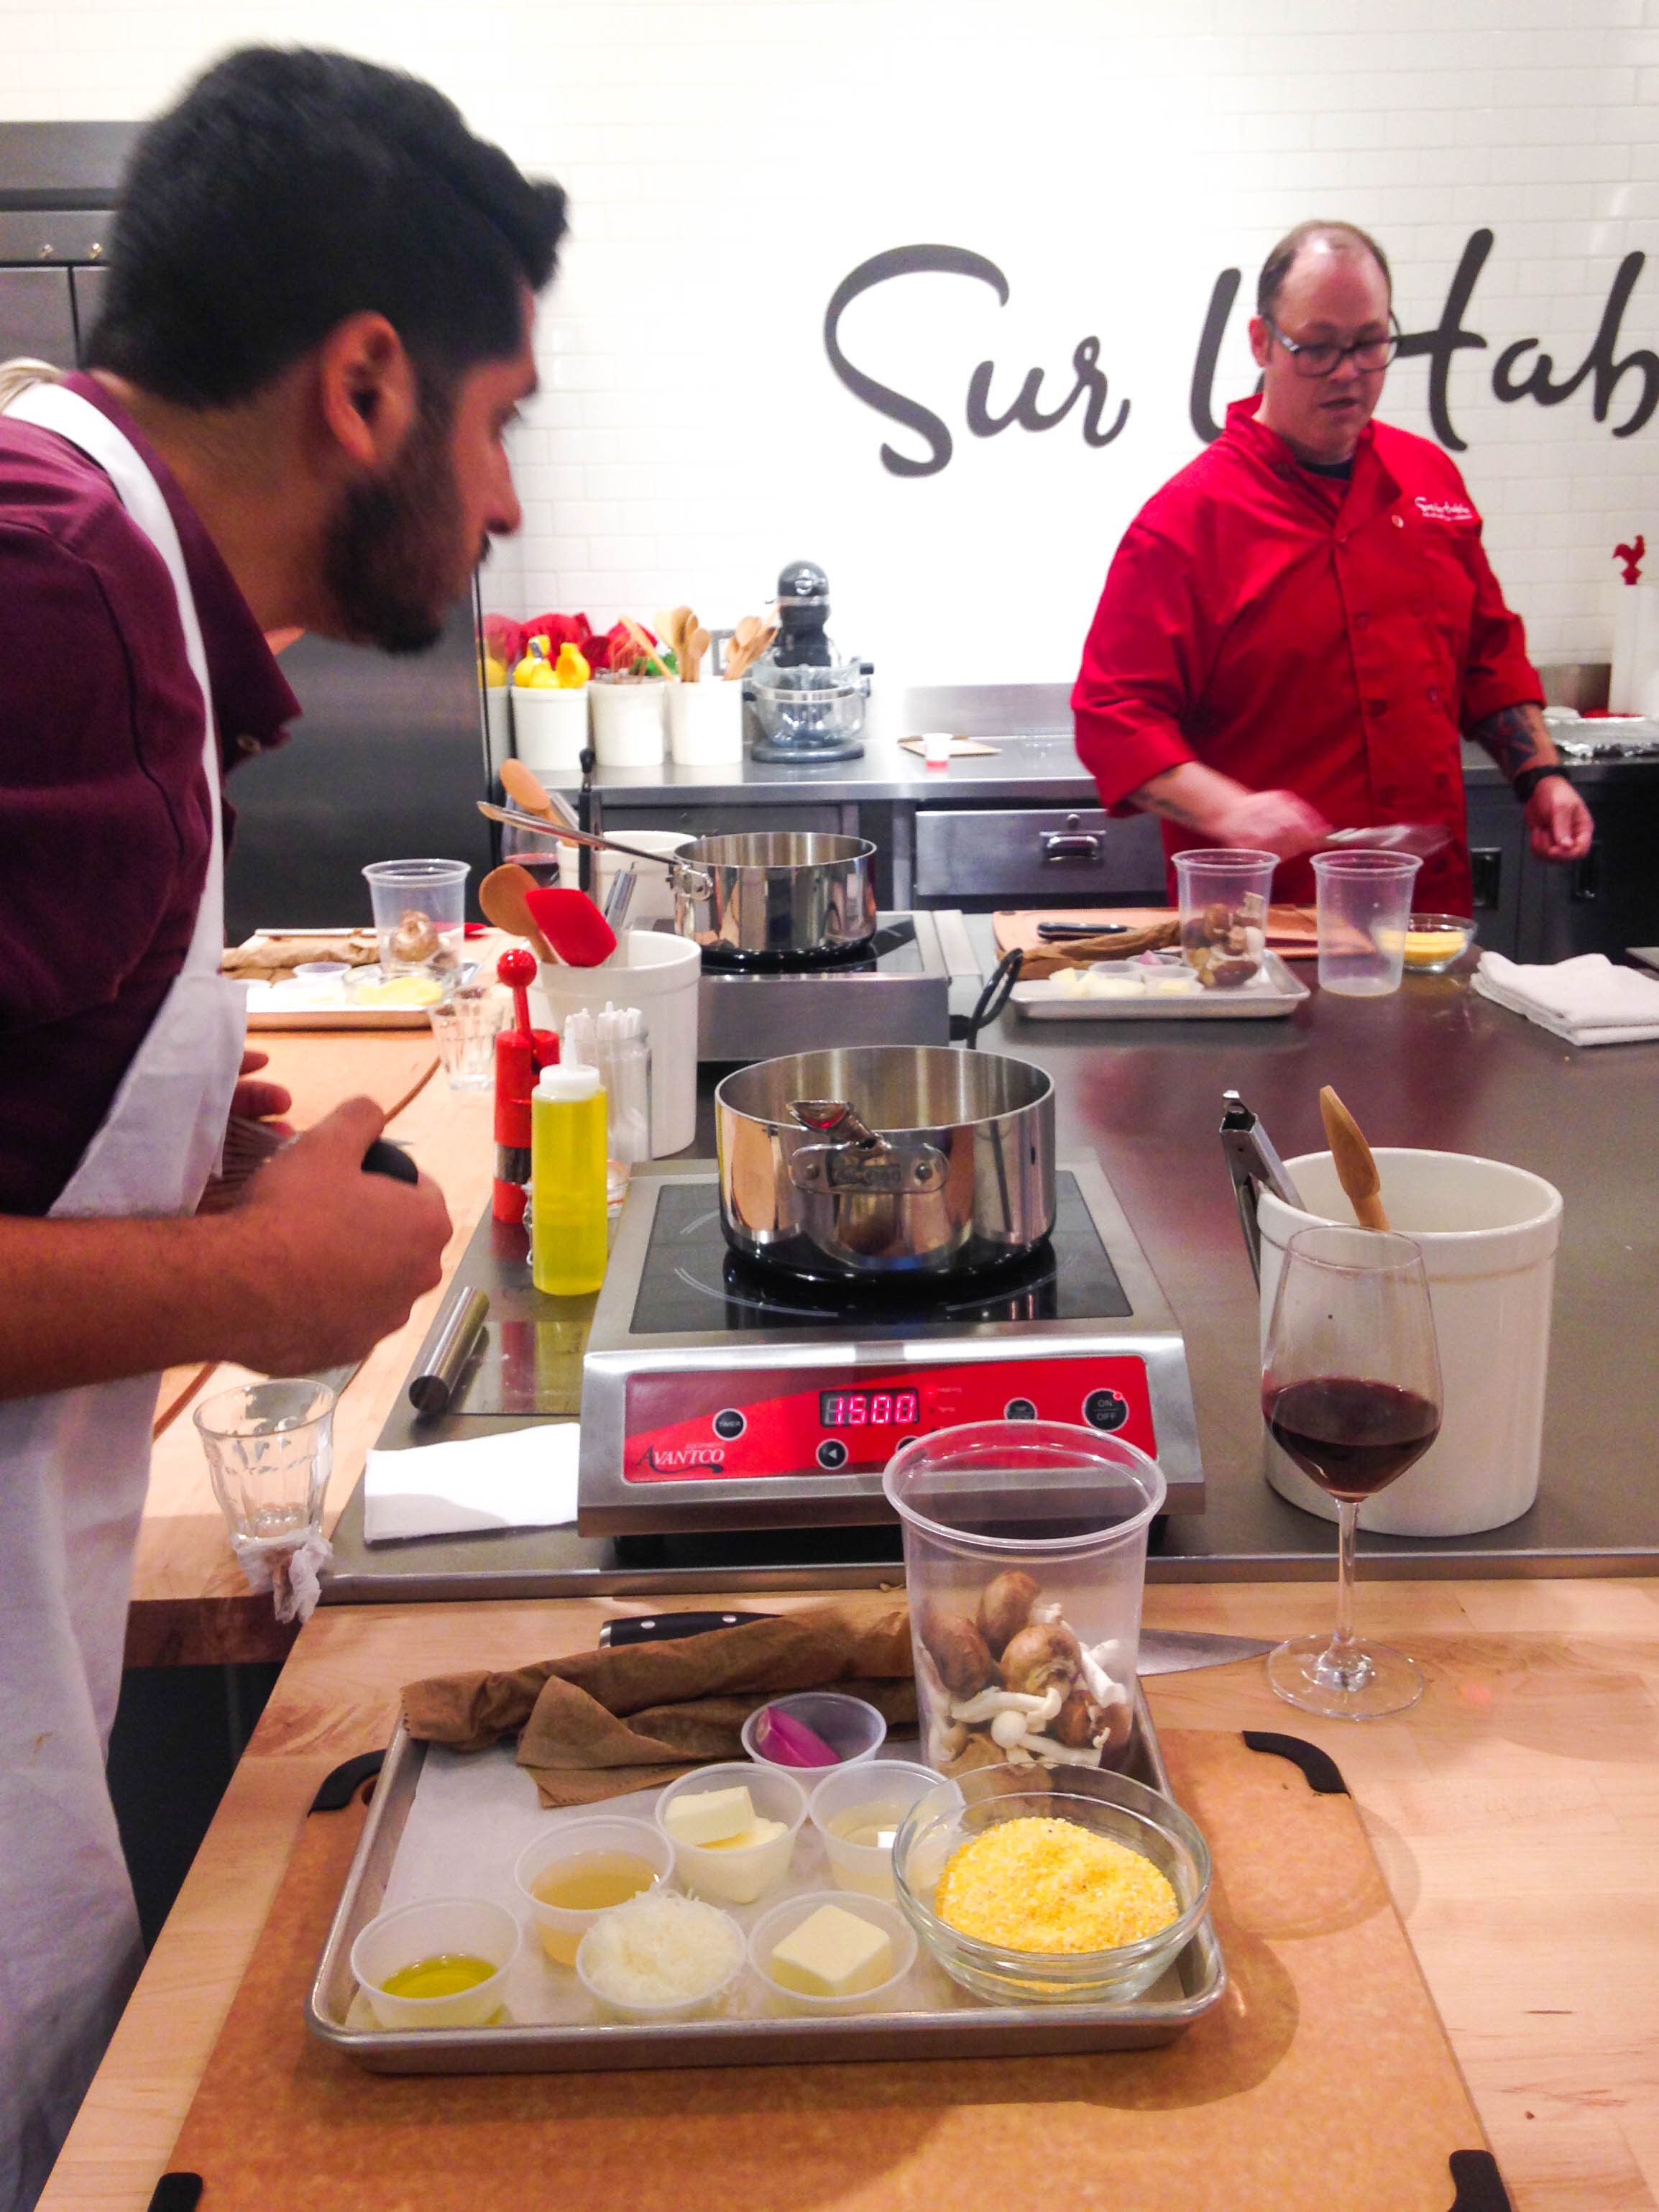 5 Things I learned from the cooking class at Sur La Table!